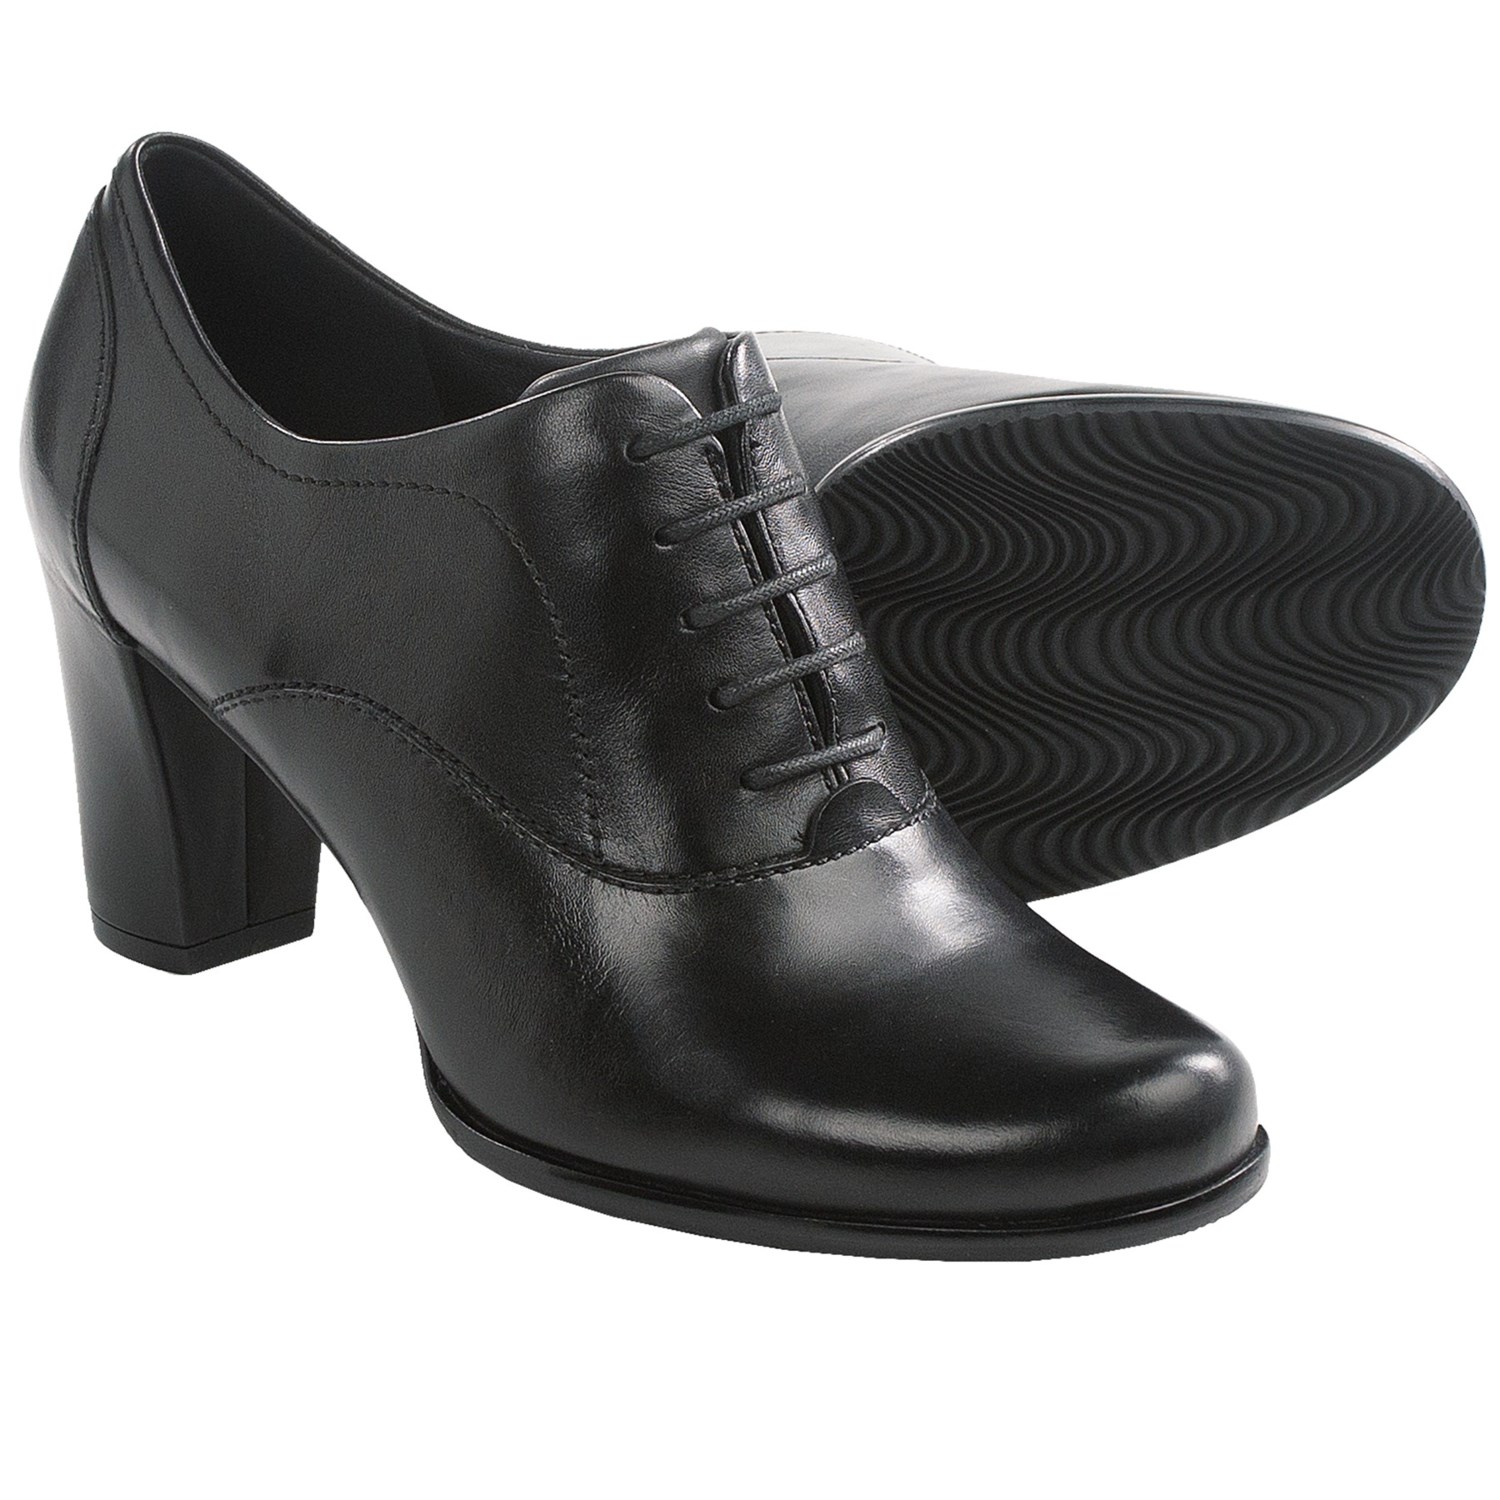 most comfortable womens work shoe